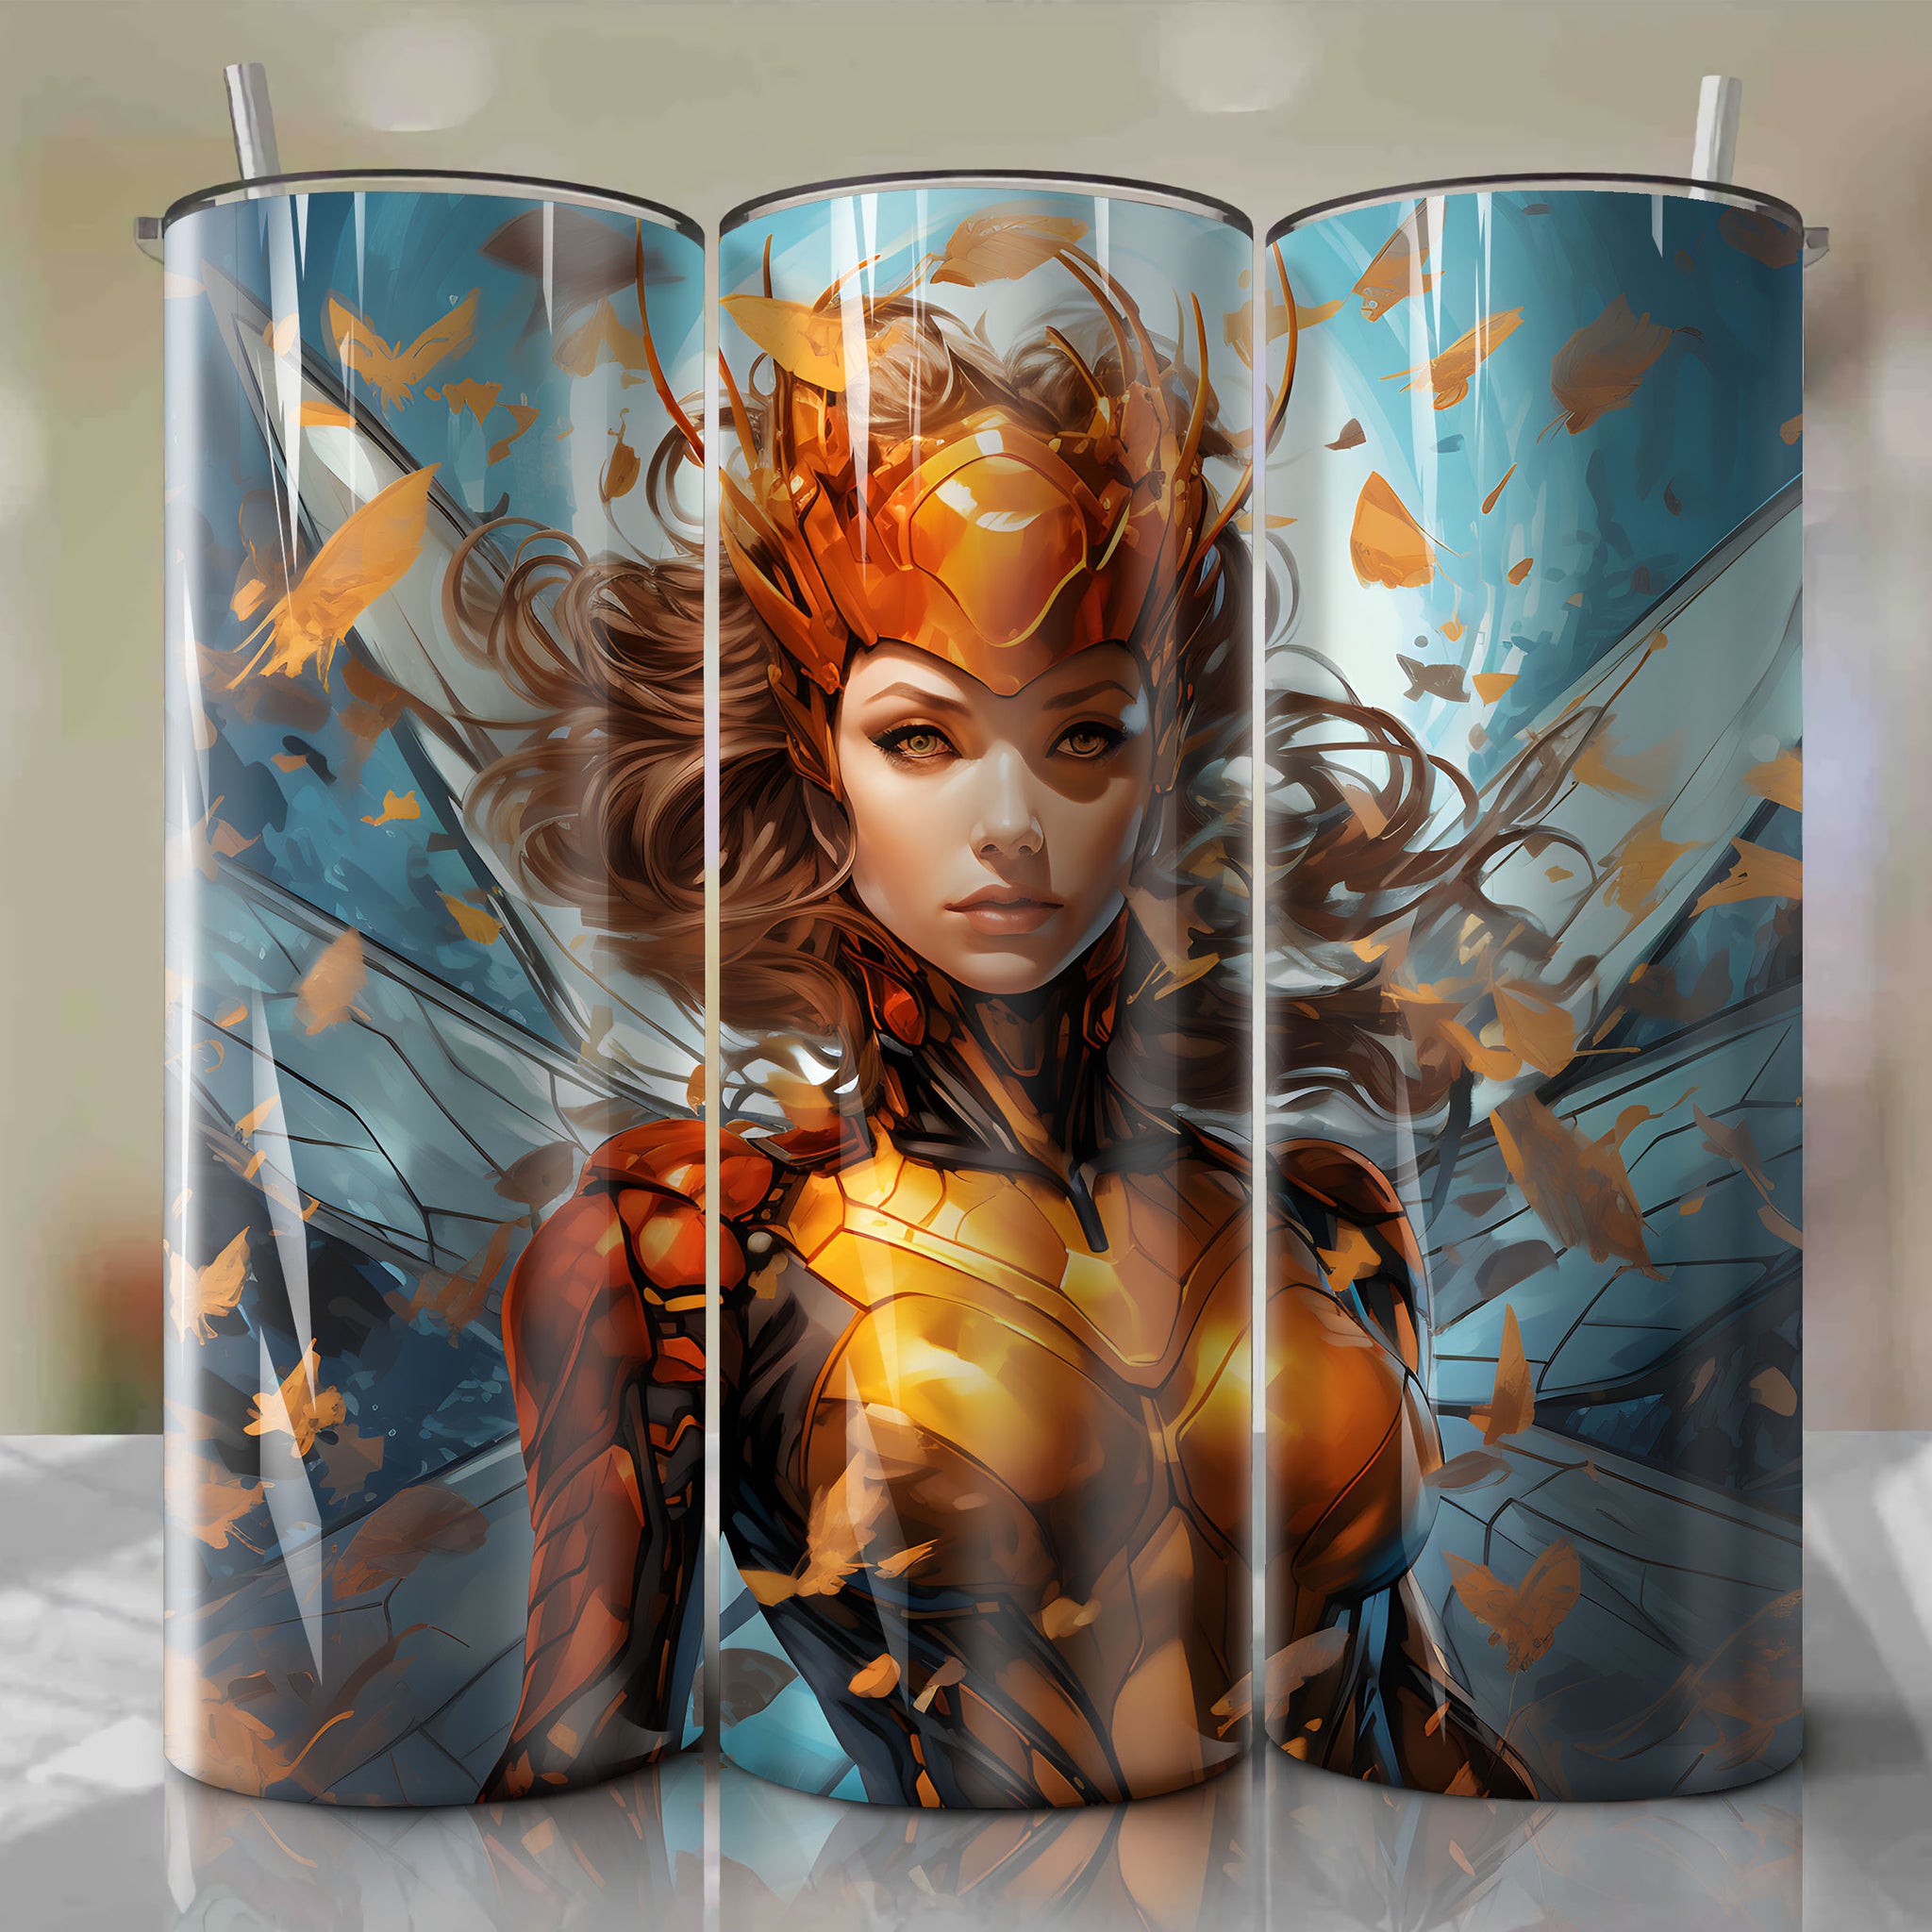 20 Oz Tumbler Wrap - A Stylish and Practical Solution for Any Beverage
